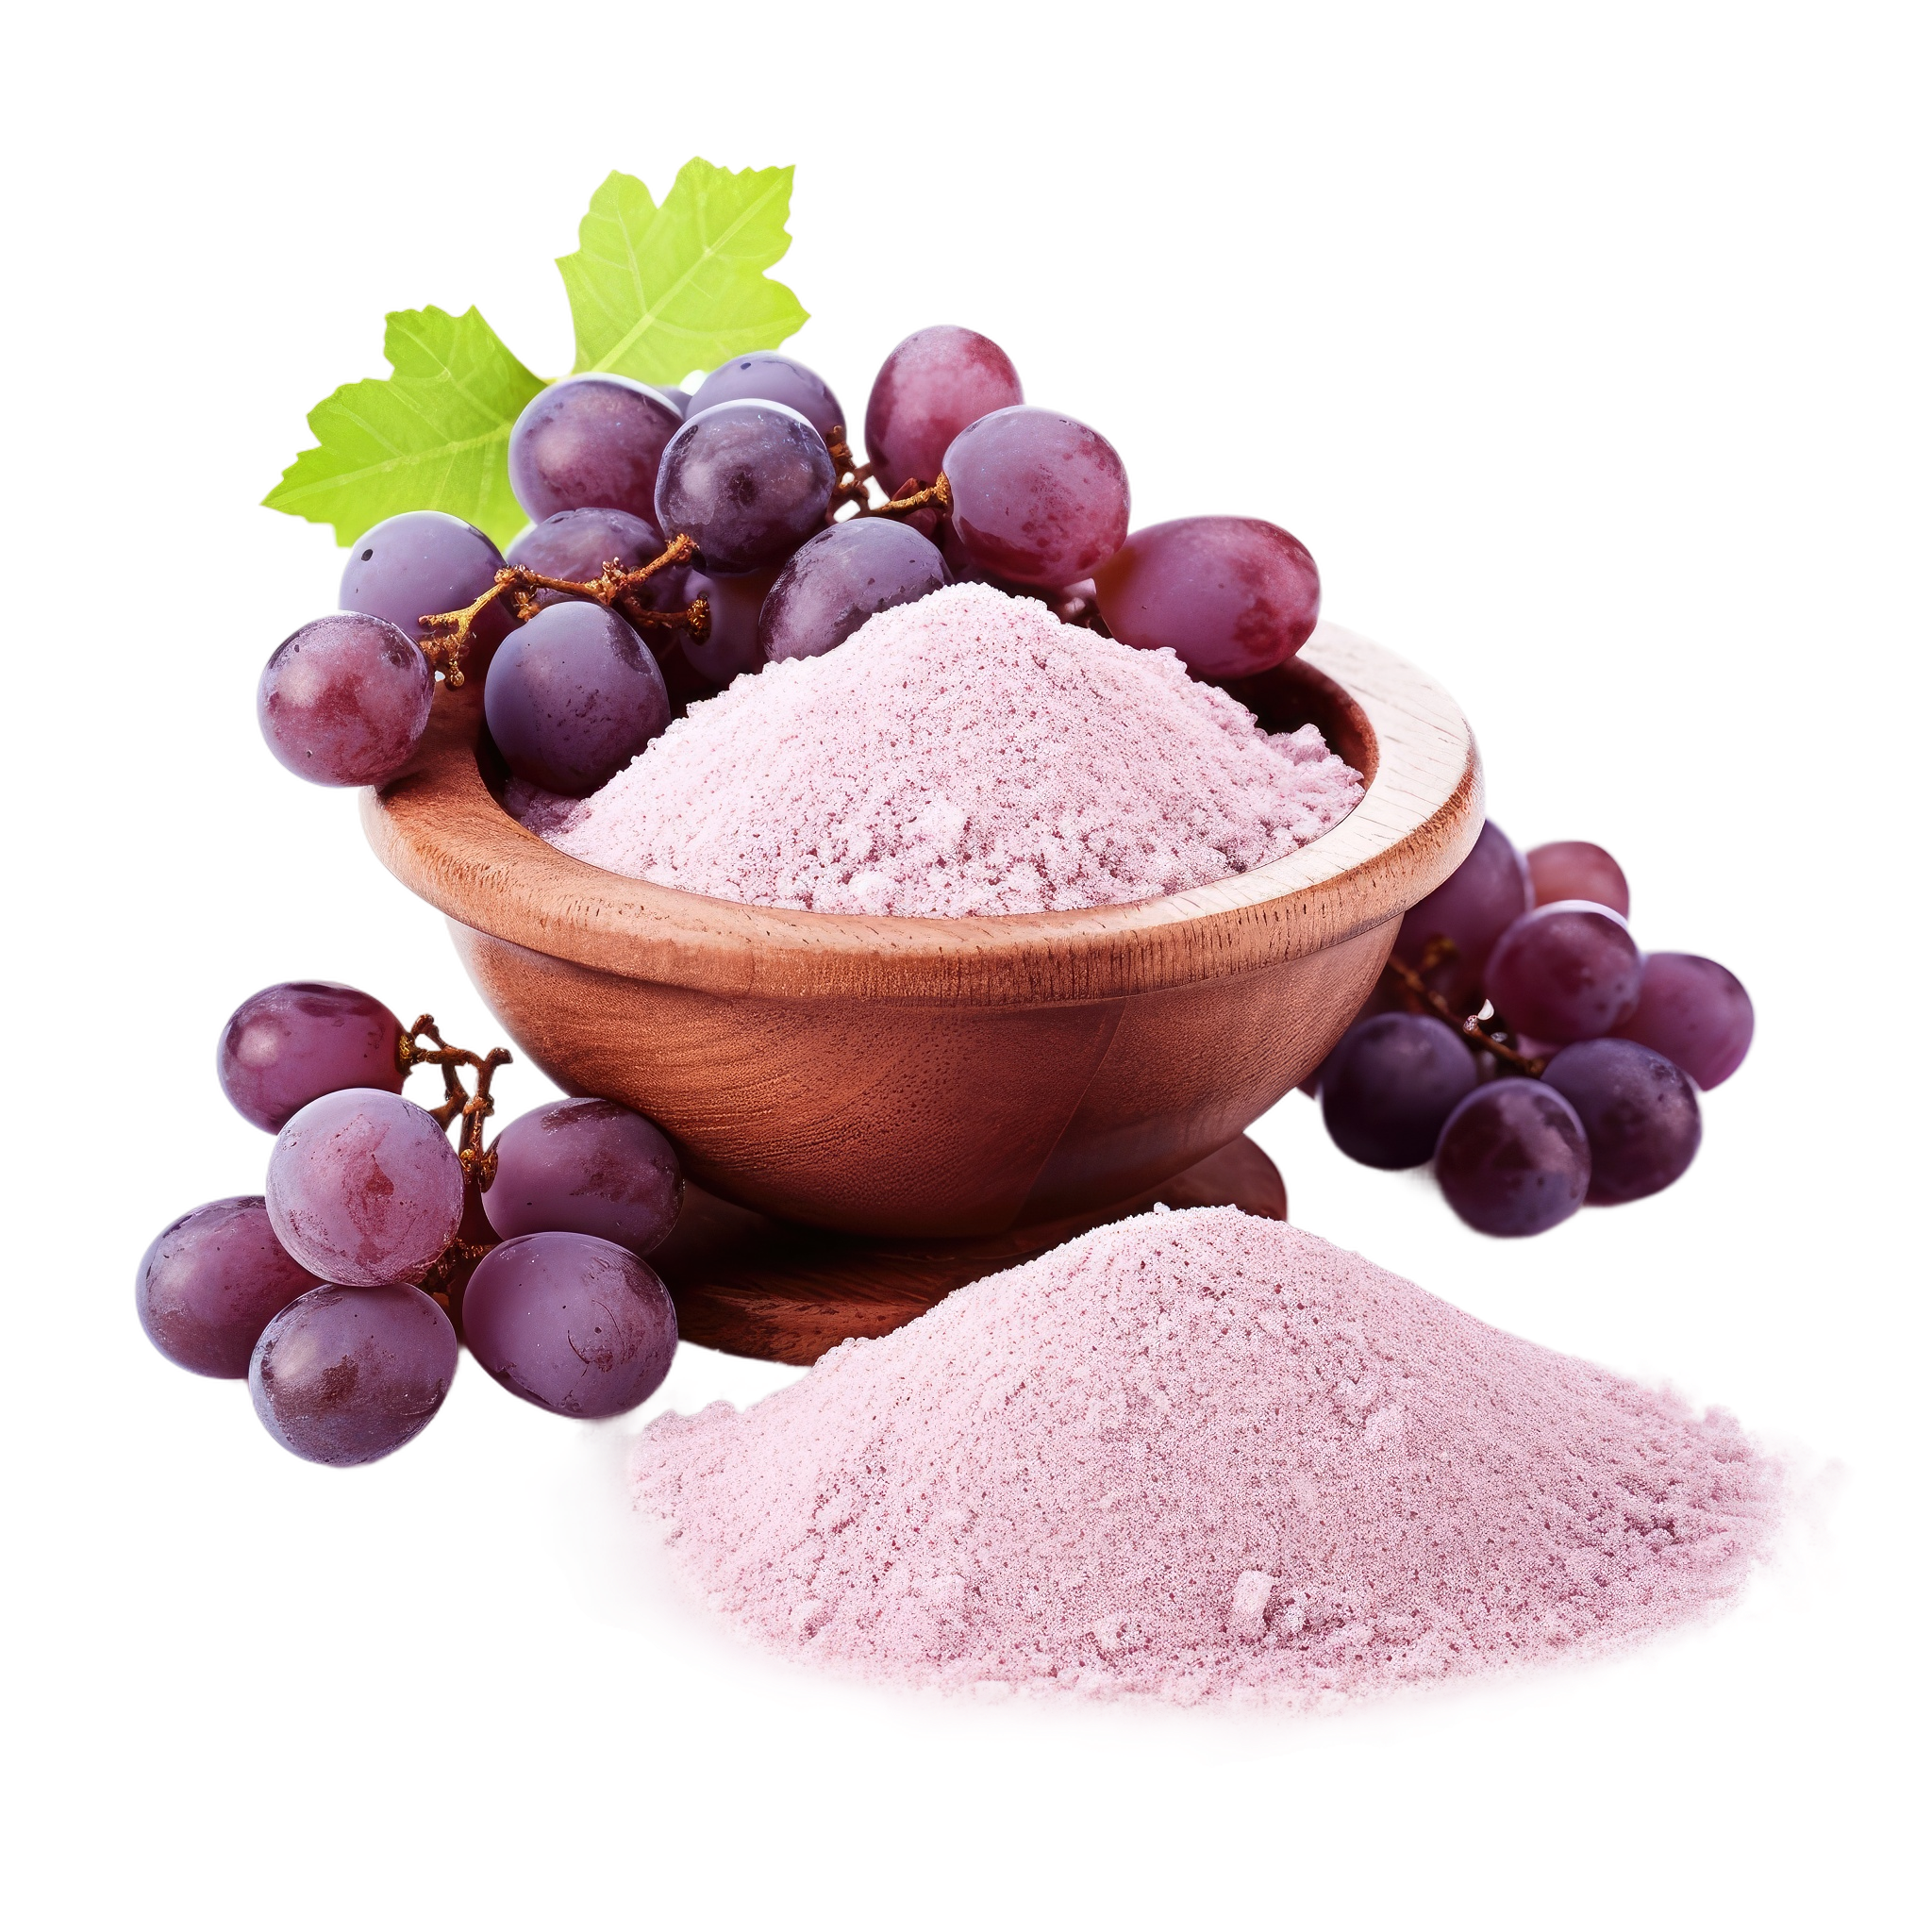 PET Study Shows Benefit of Grapes in Stabilizing Brain Metabolism for People with Mild Cognitive Decline 